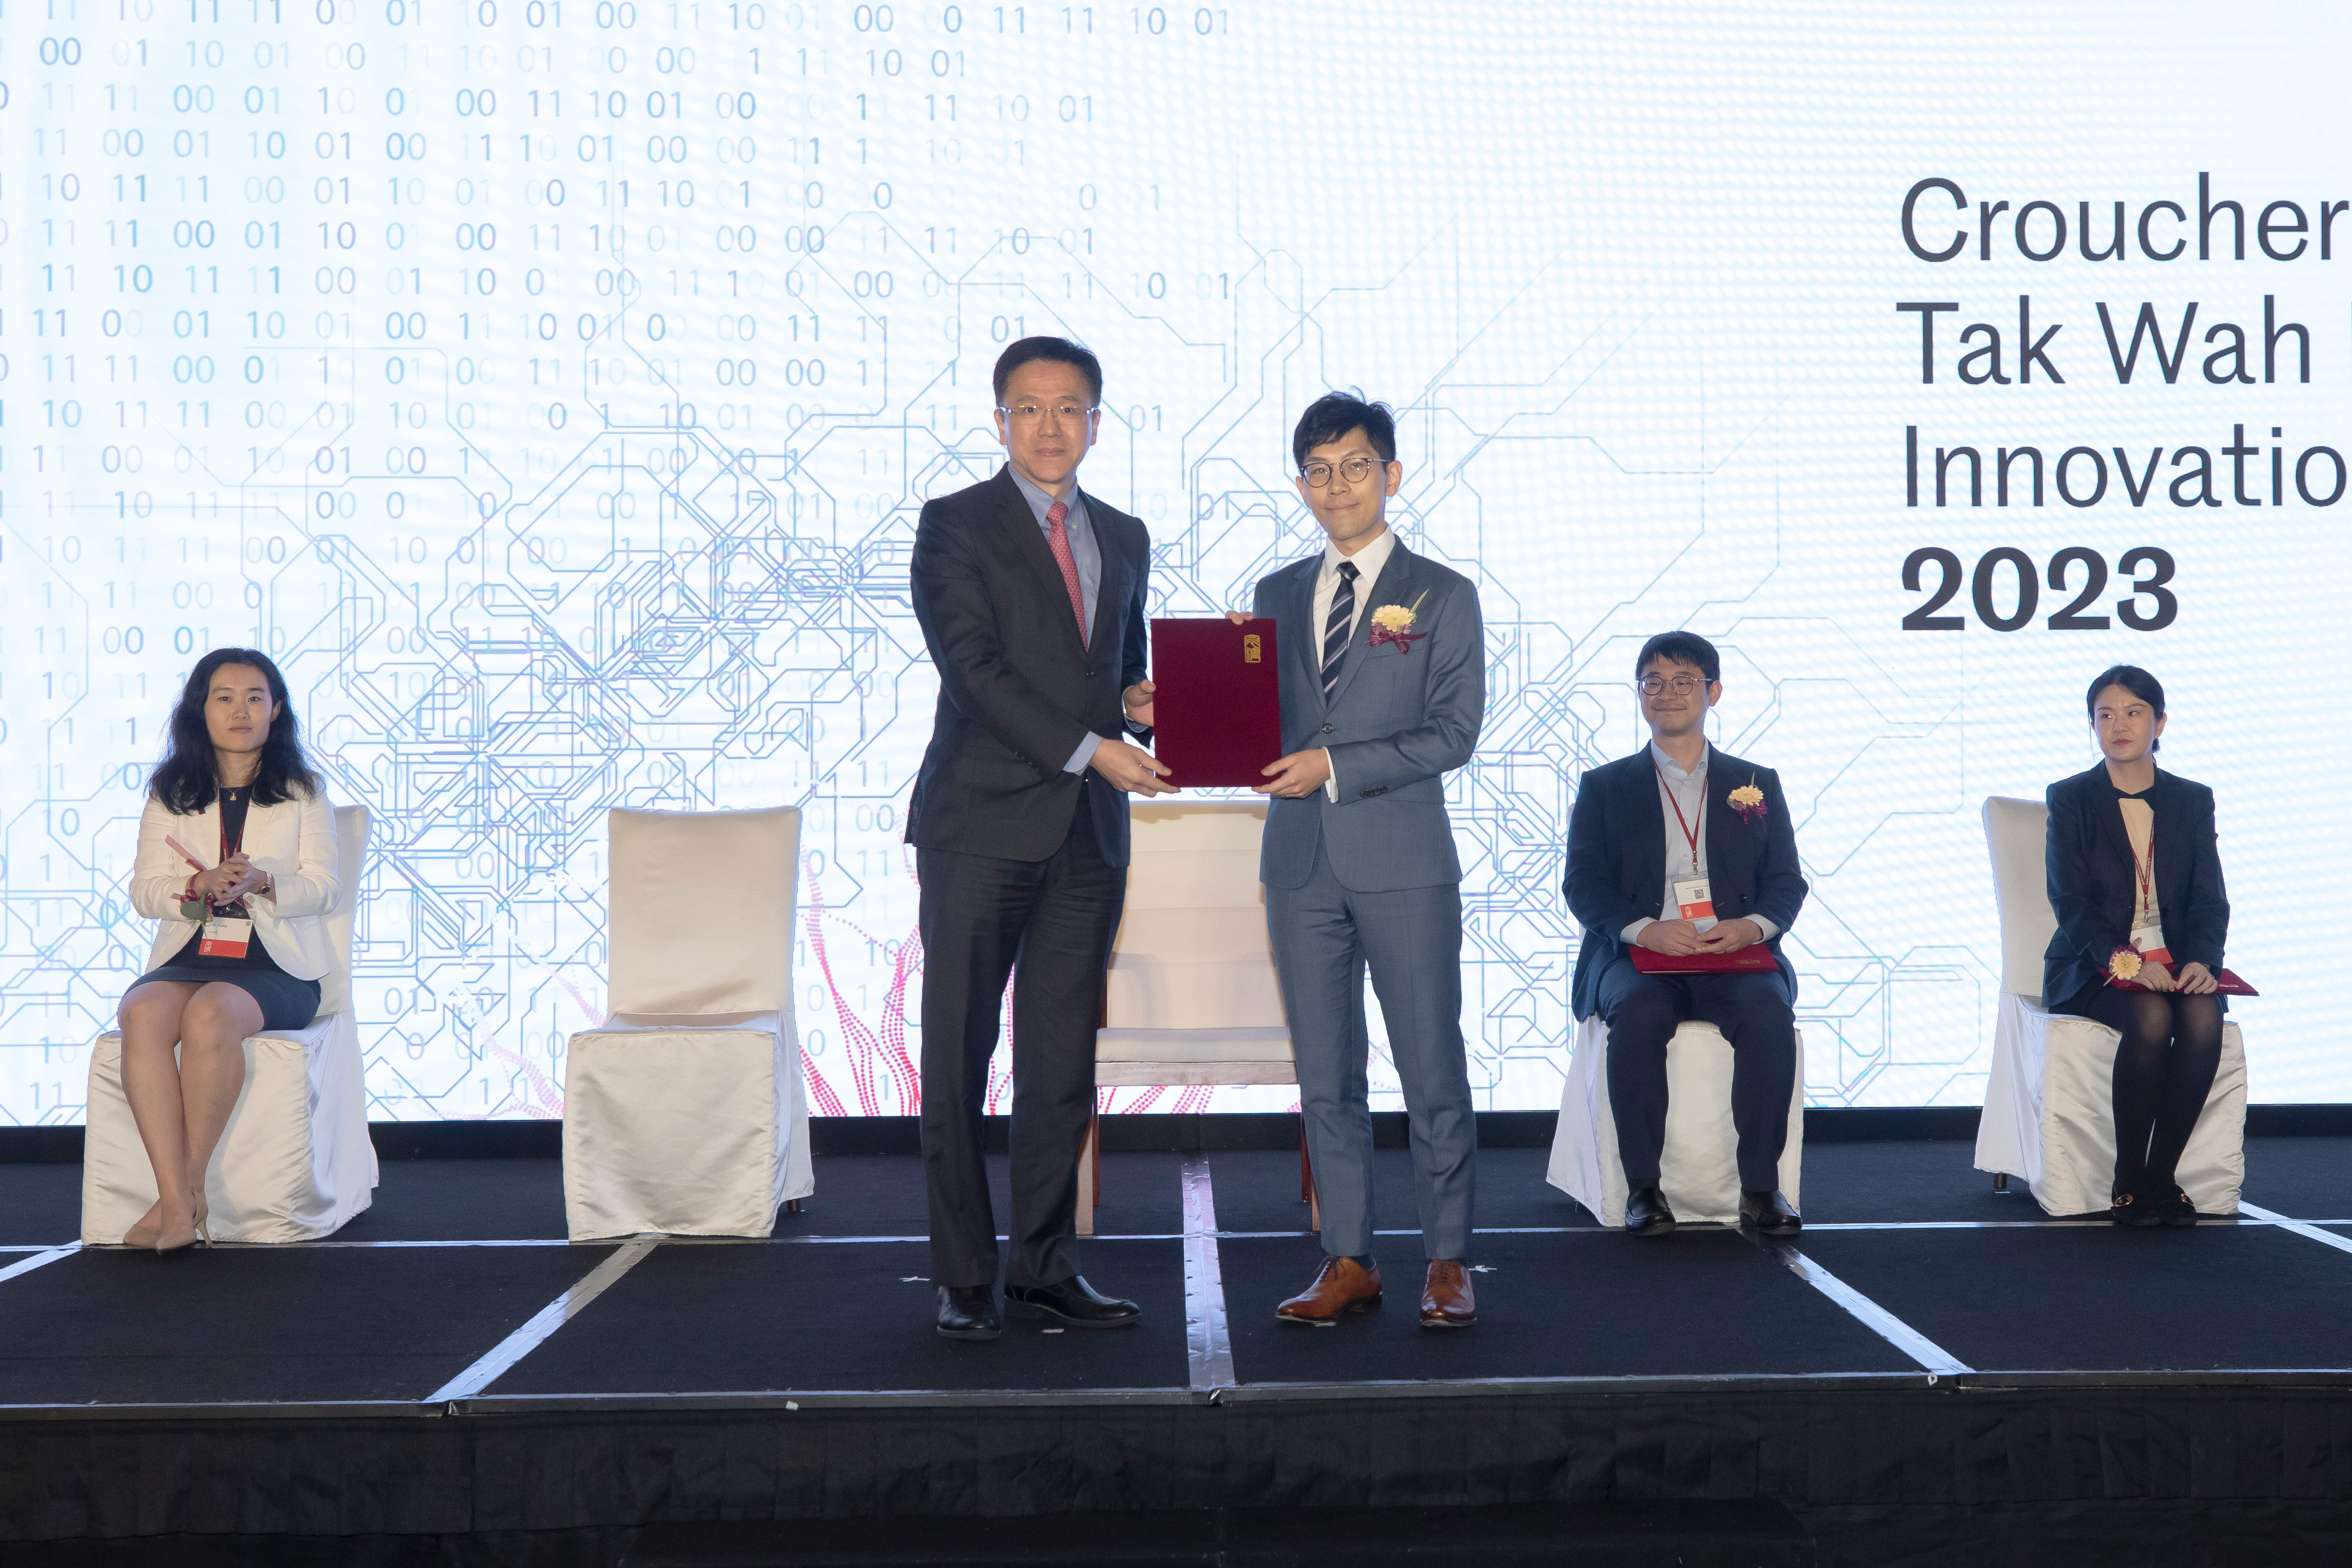 Prof. SUN Dong (left) presents the Croucher Tak Wah Mak Innovation Award 2023 to Dr. Adrian PO Hoi-Chun (right), Hari Harilela Assistant Professor of Physics, Department of Physics, School of Science at the Hong Kong University of Science and Technology.